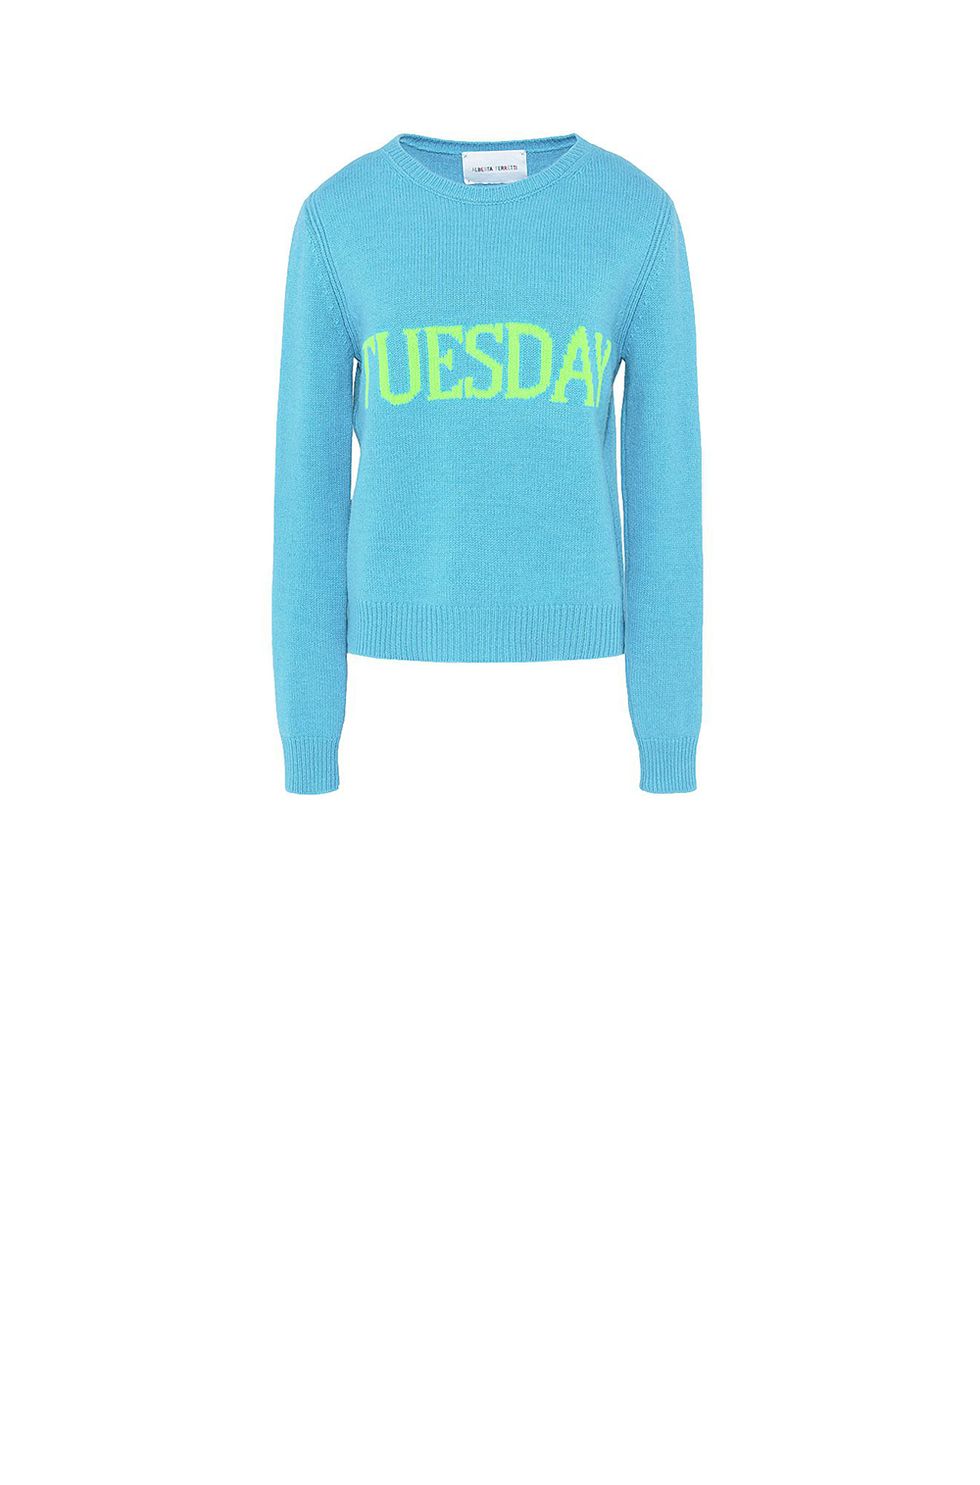 Clothing, Blue, Turquoise, Sleeve, Long-sleeved t-shirt, Green, Sweater, T-shirt, Outerwear, Aqua, 